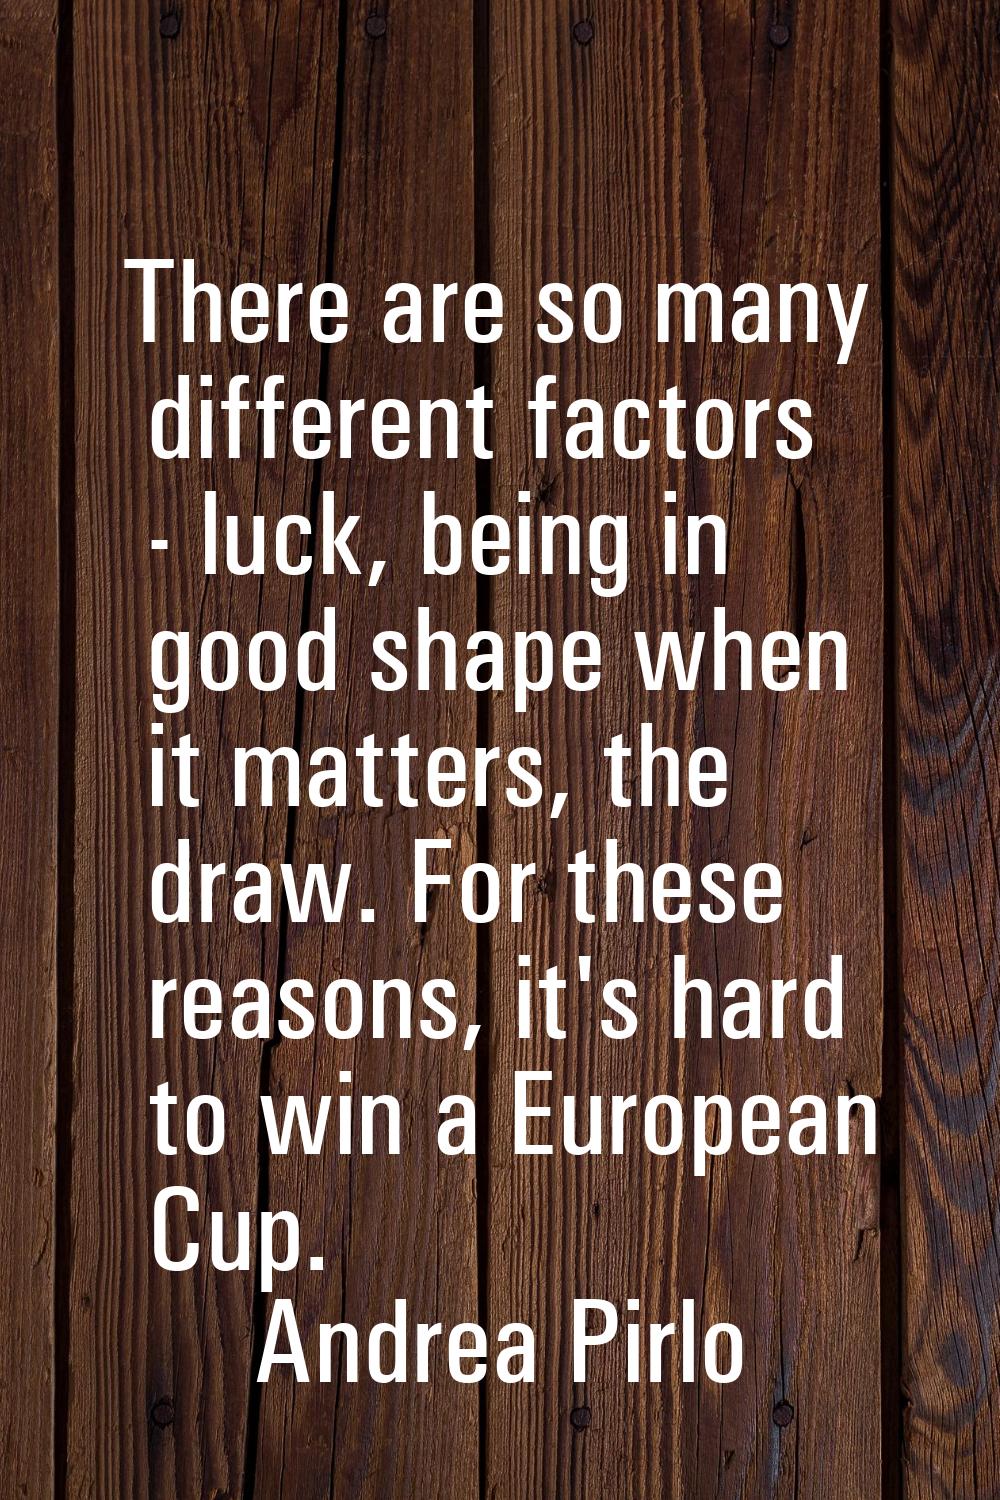 There are so many different factors - luck, being in good shape when it matters, the draw. For thes